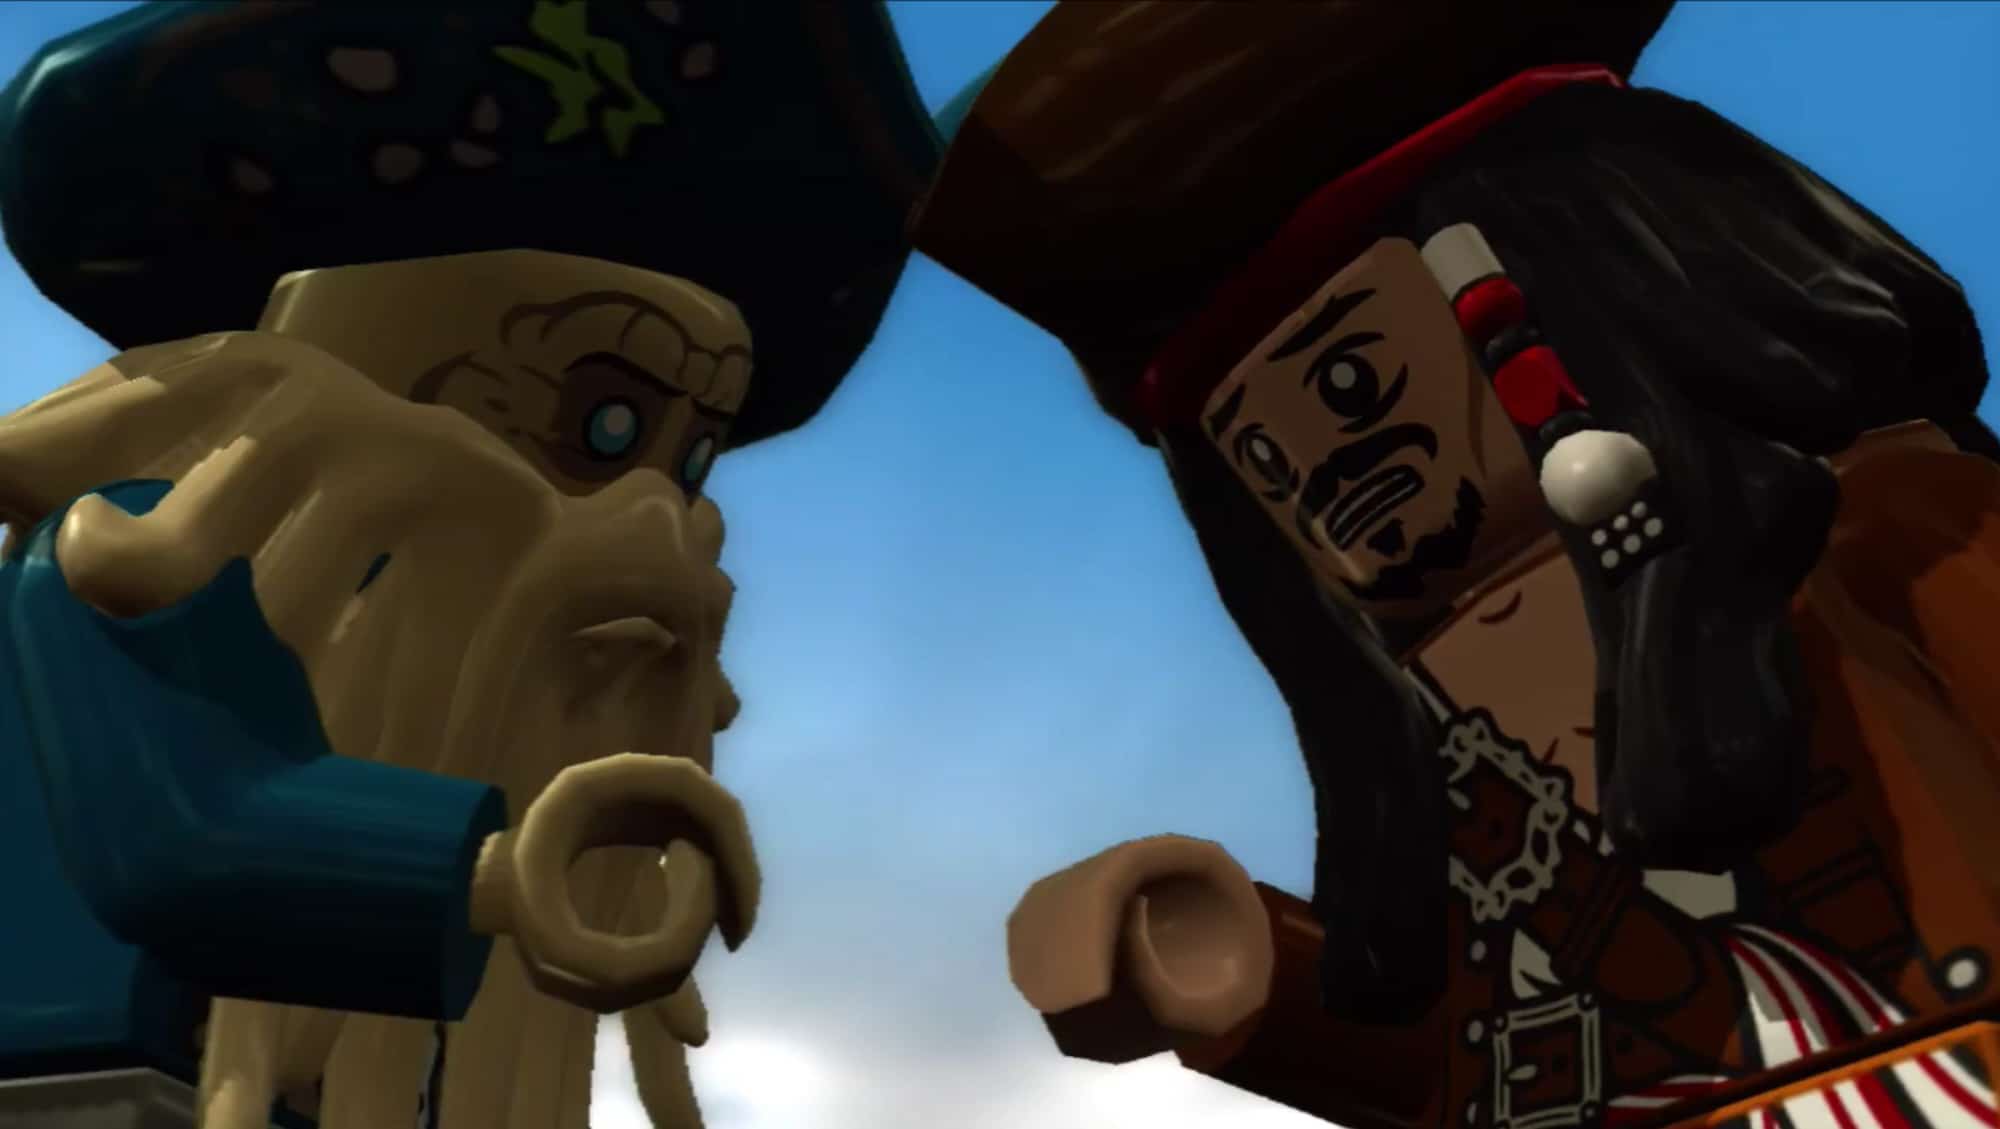 Lego Pirates of the Characters List. How to and buy secret characters (Guide) - Video Games